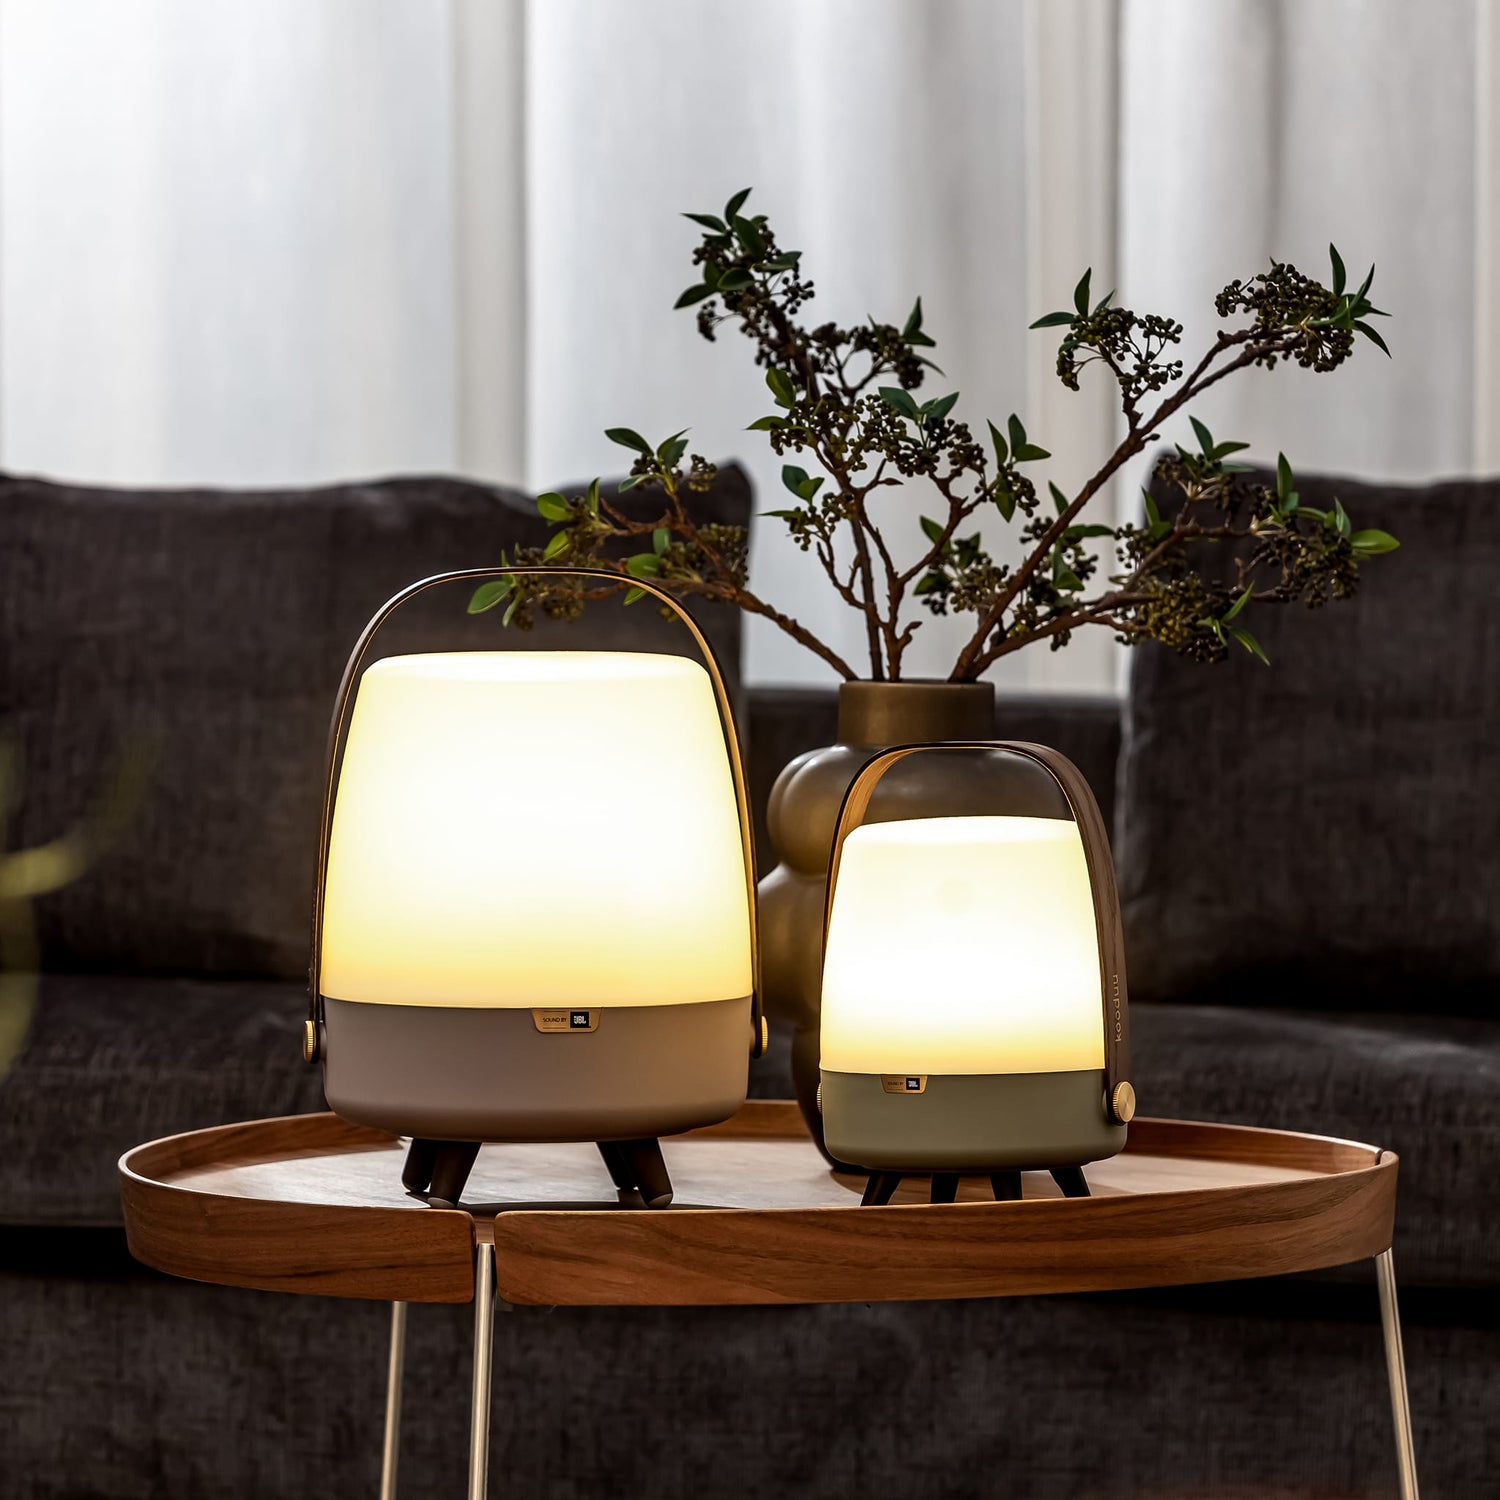 Scandinavian Lite-up Play Earth, warm light with brass accents, for Canadian homes.